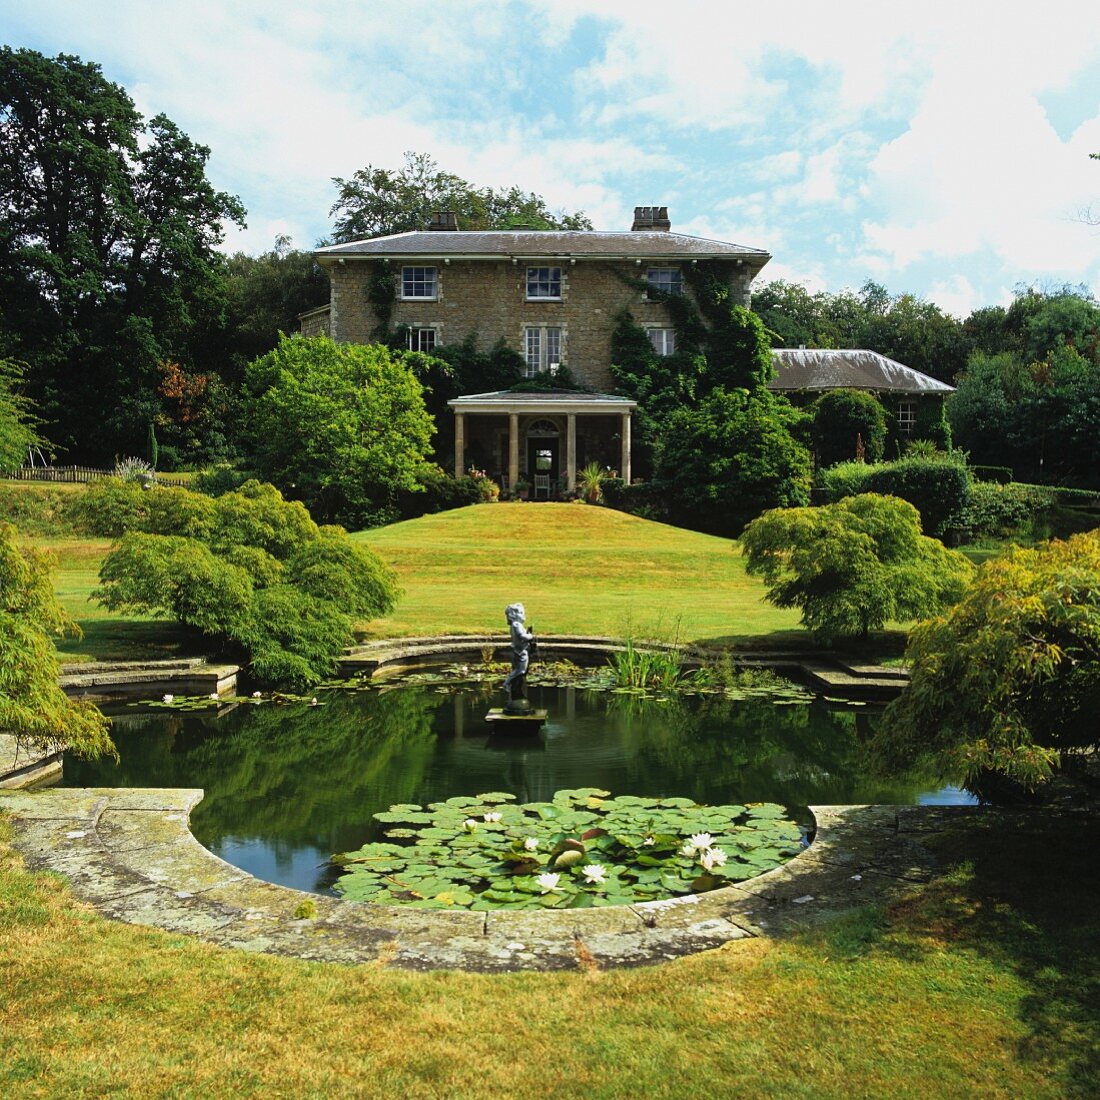 Summer atmosphere in park-style garden with pond in front of grand country house